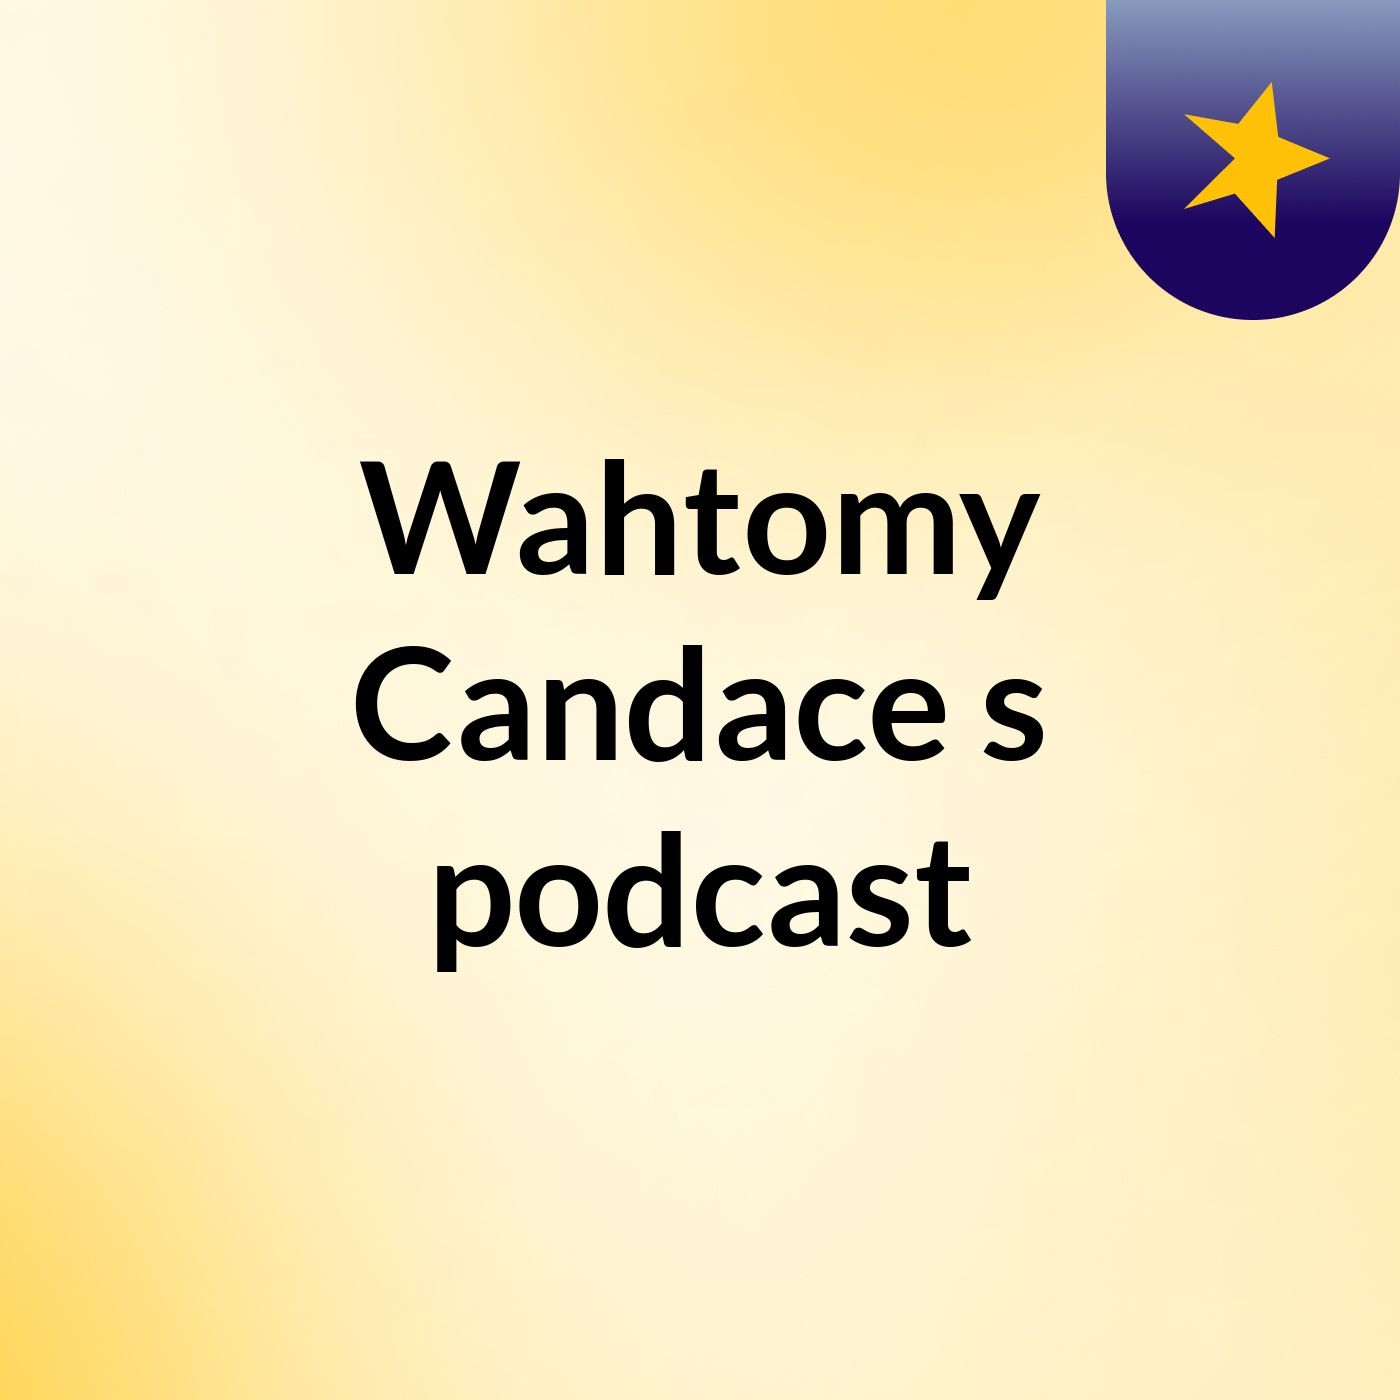 Wahtomy Candace's podcast